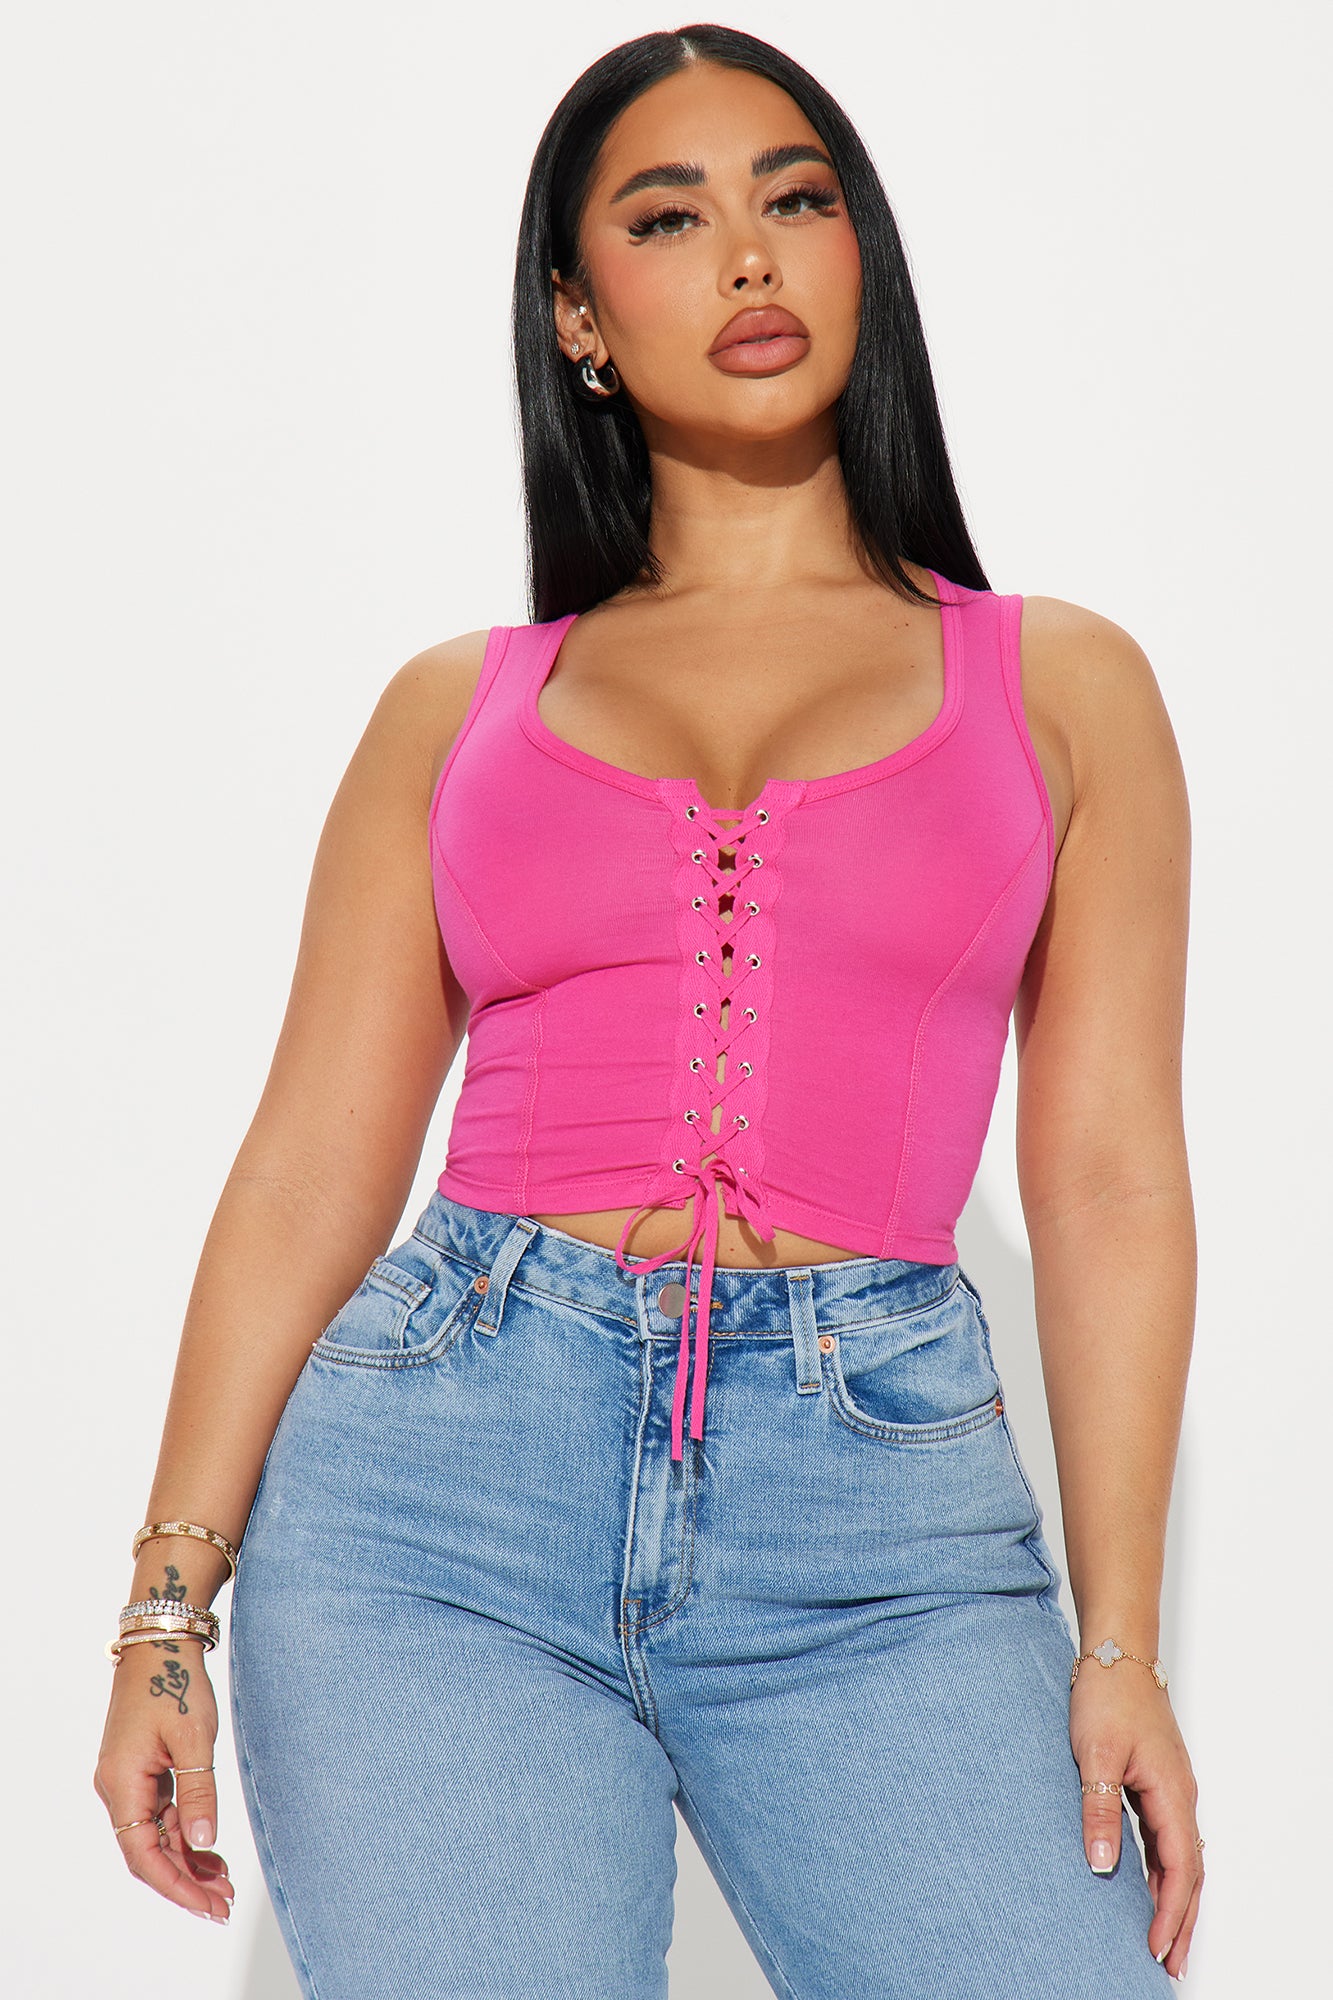 The Fashion Nova Crop Top - Natalie in the City